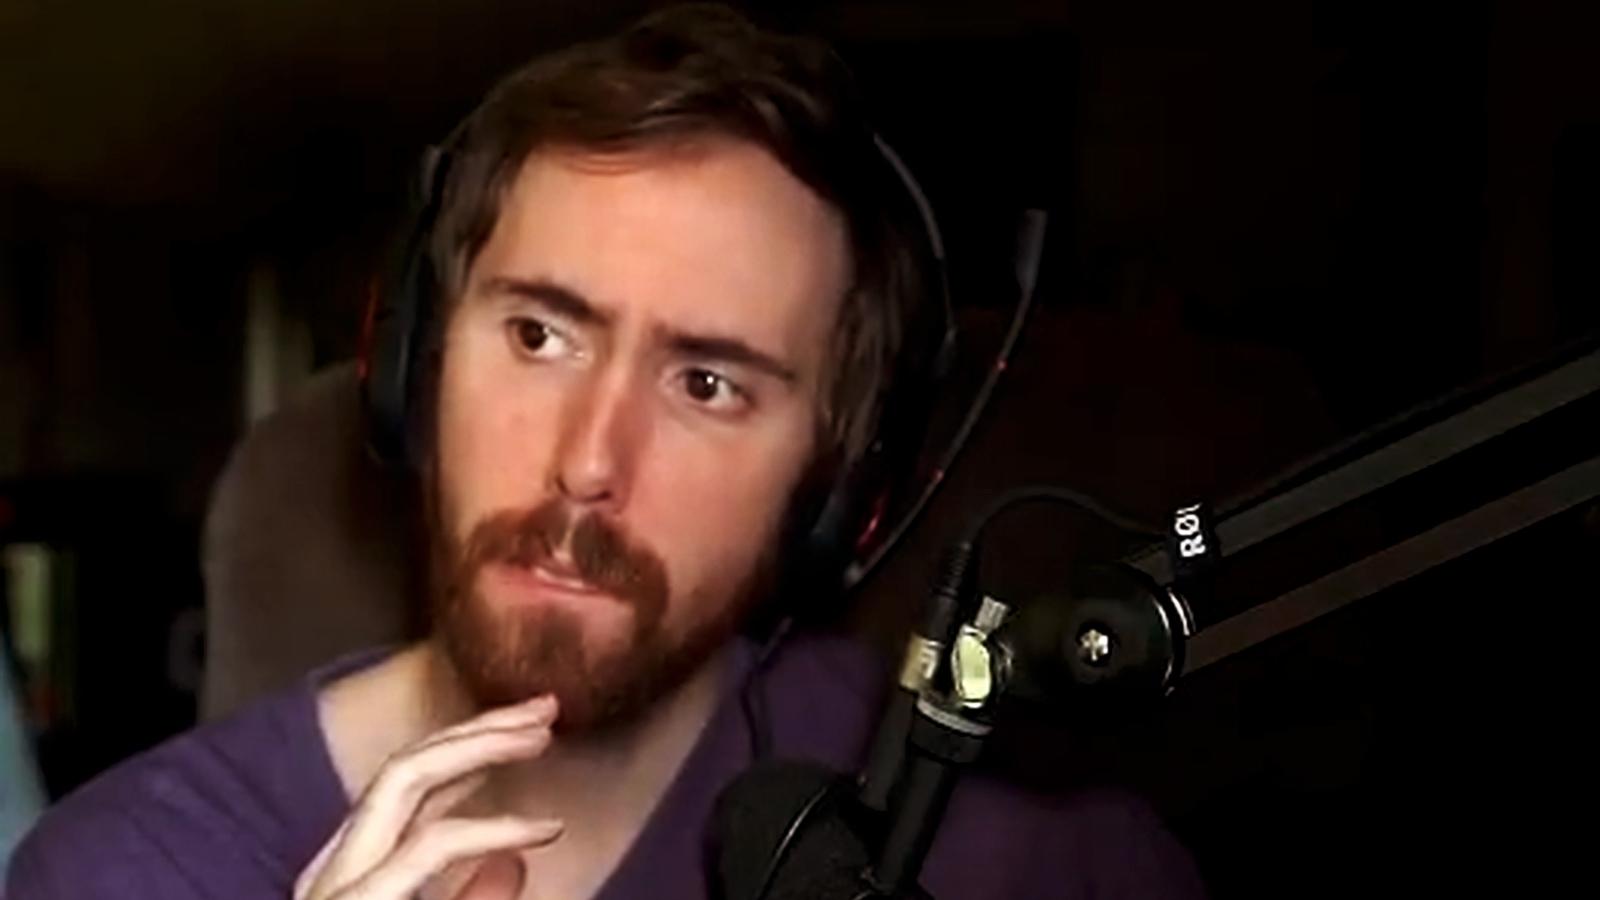 Asmongold/Twitch